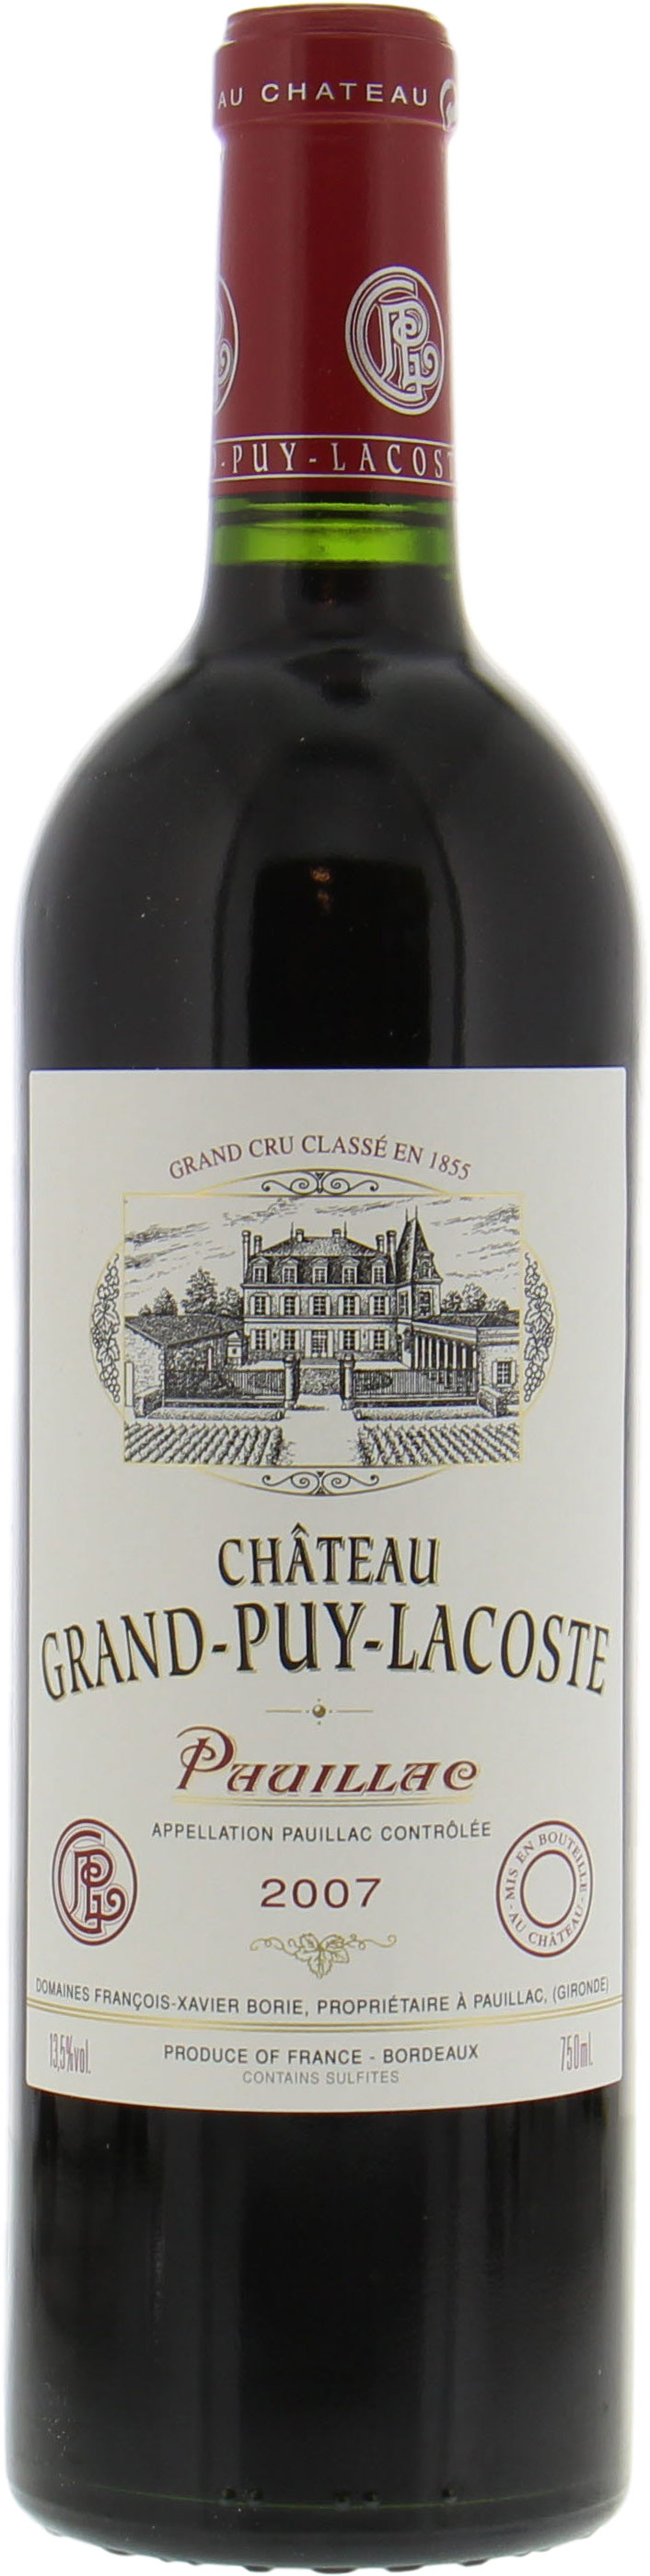 Chateau Grand Puy Lacoste - Chateau Grand Puy Lacoste 2007 Perfect